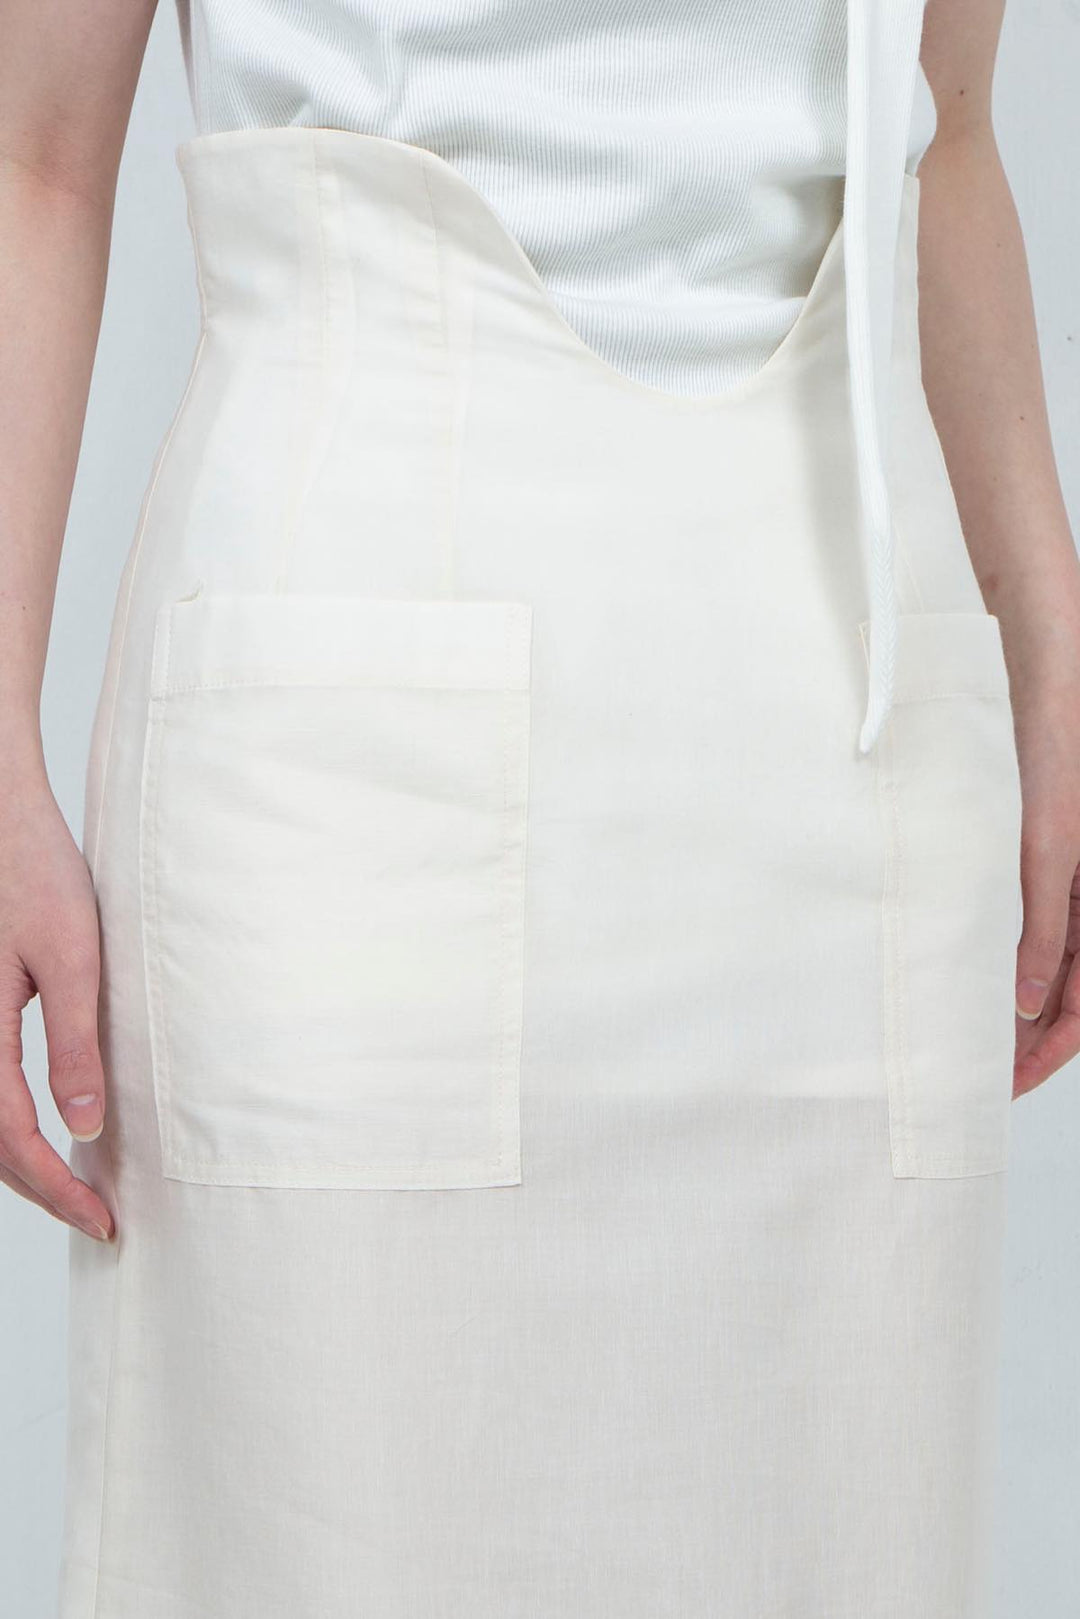 Embroidery linen pencil skirt IVORY